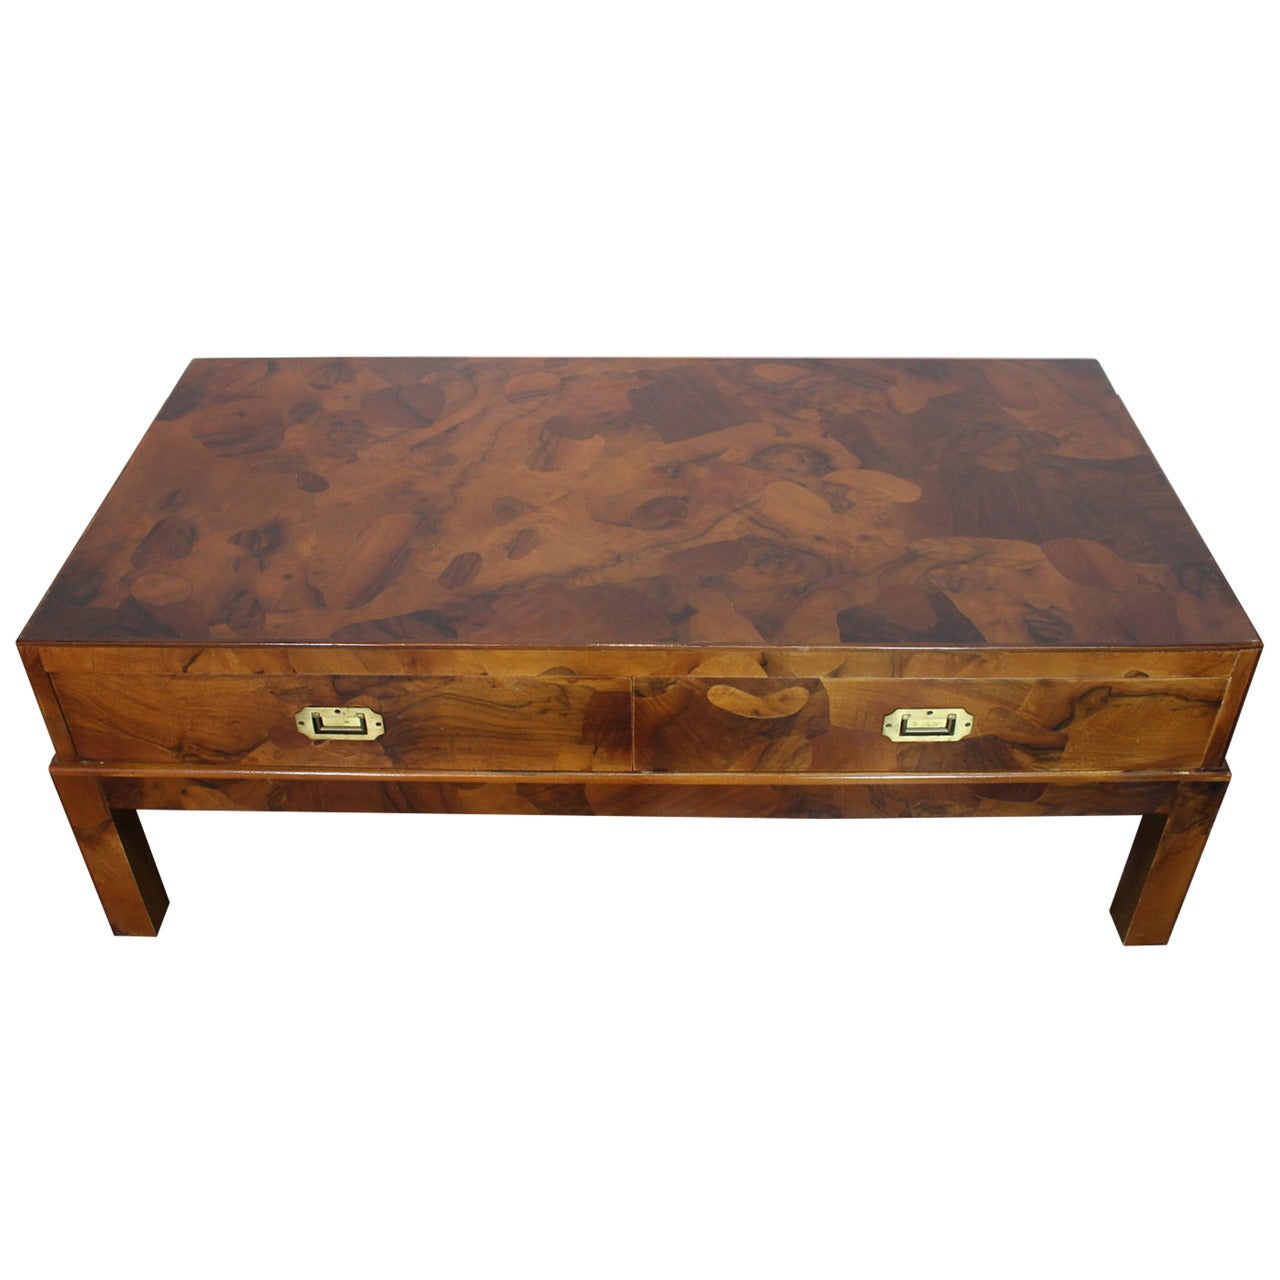 Italian Burled Patchwork Campaign Coffee Table